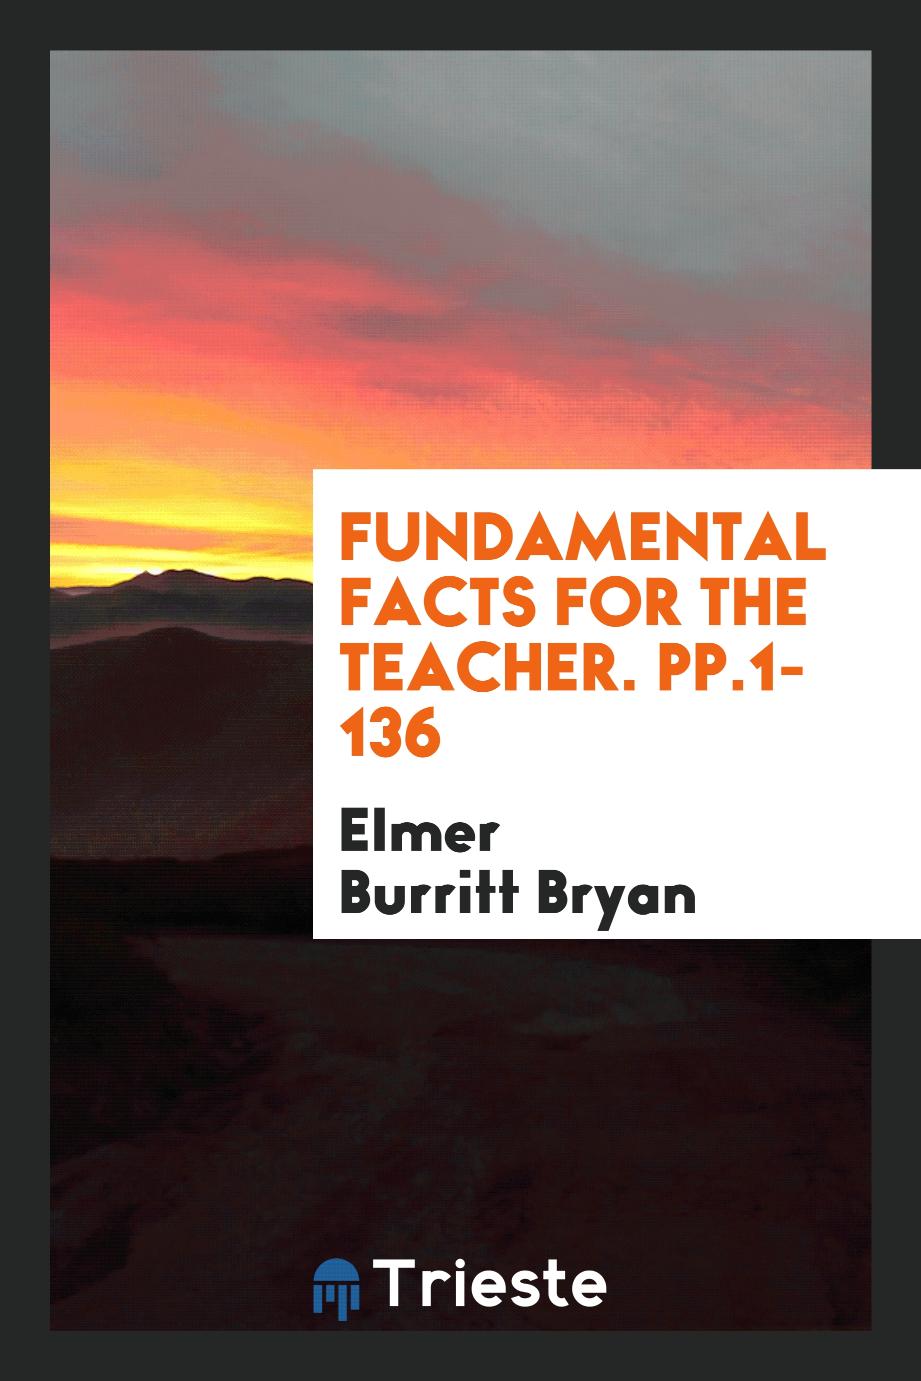 Fundamental Facts for the Teacher. pp.1-136